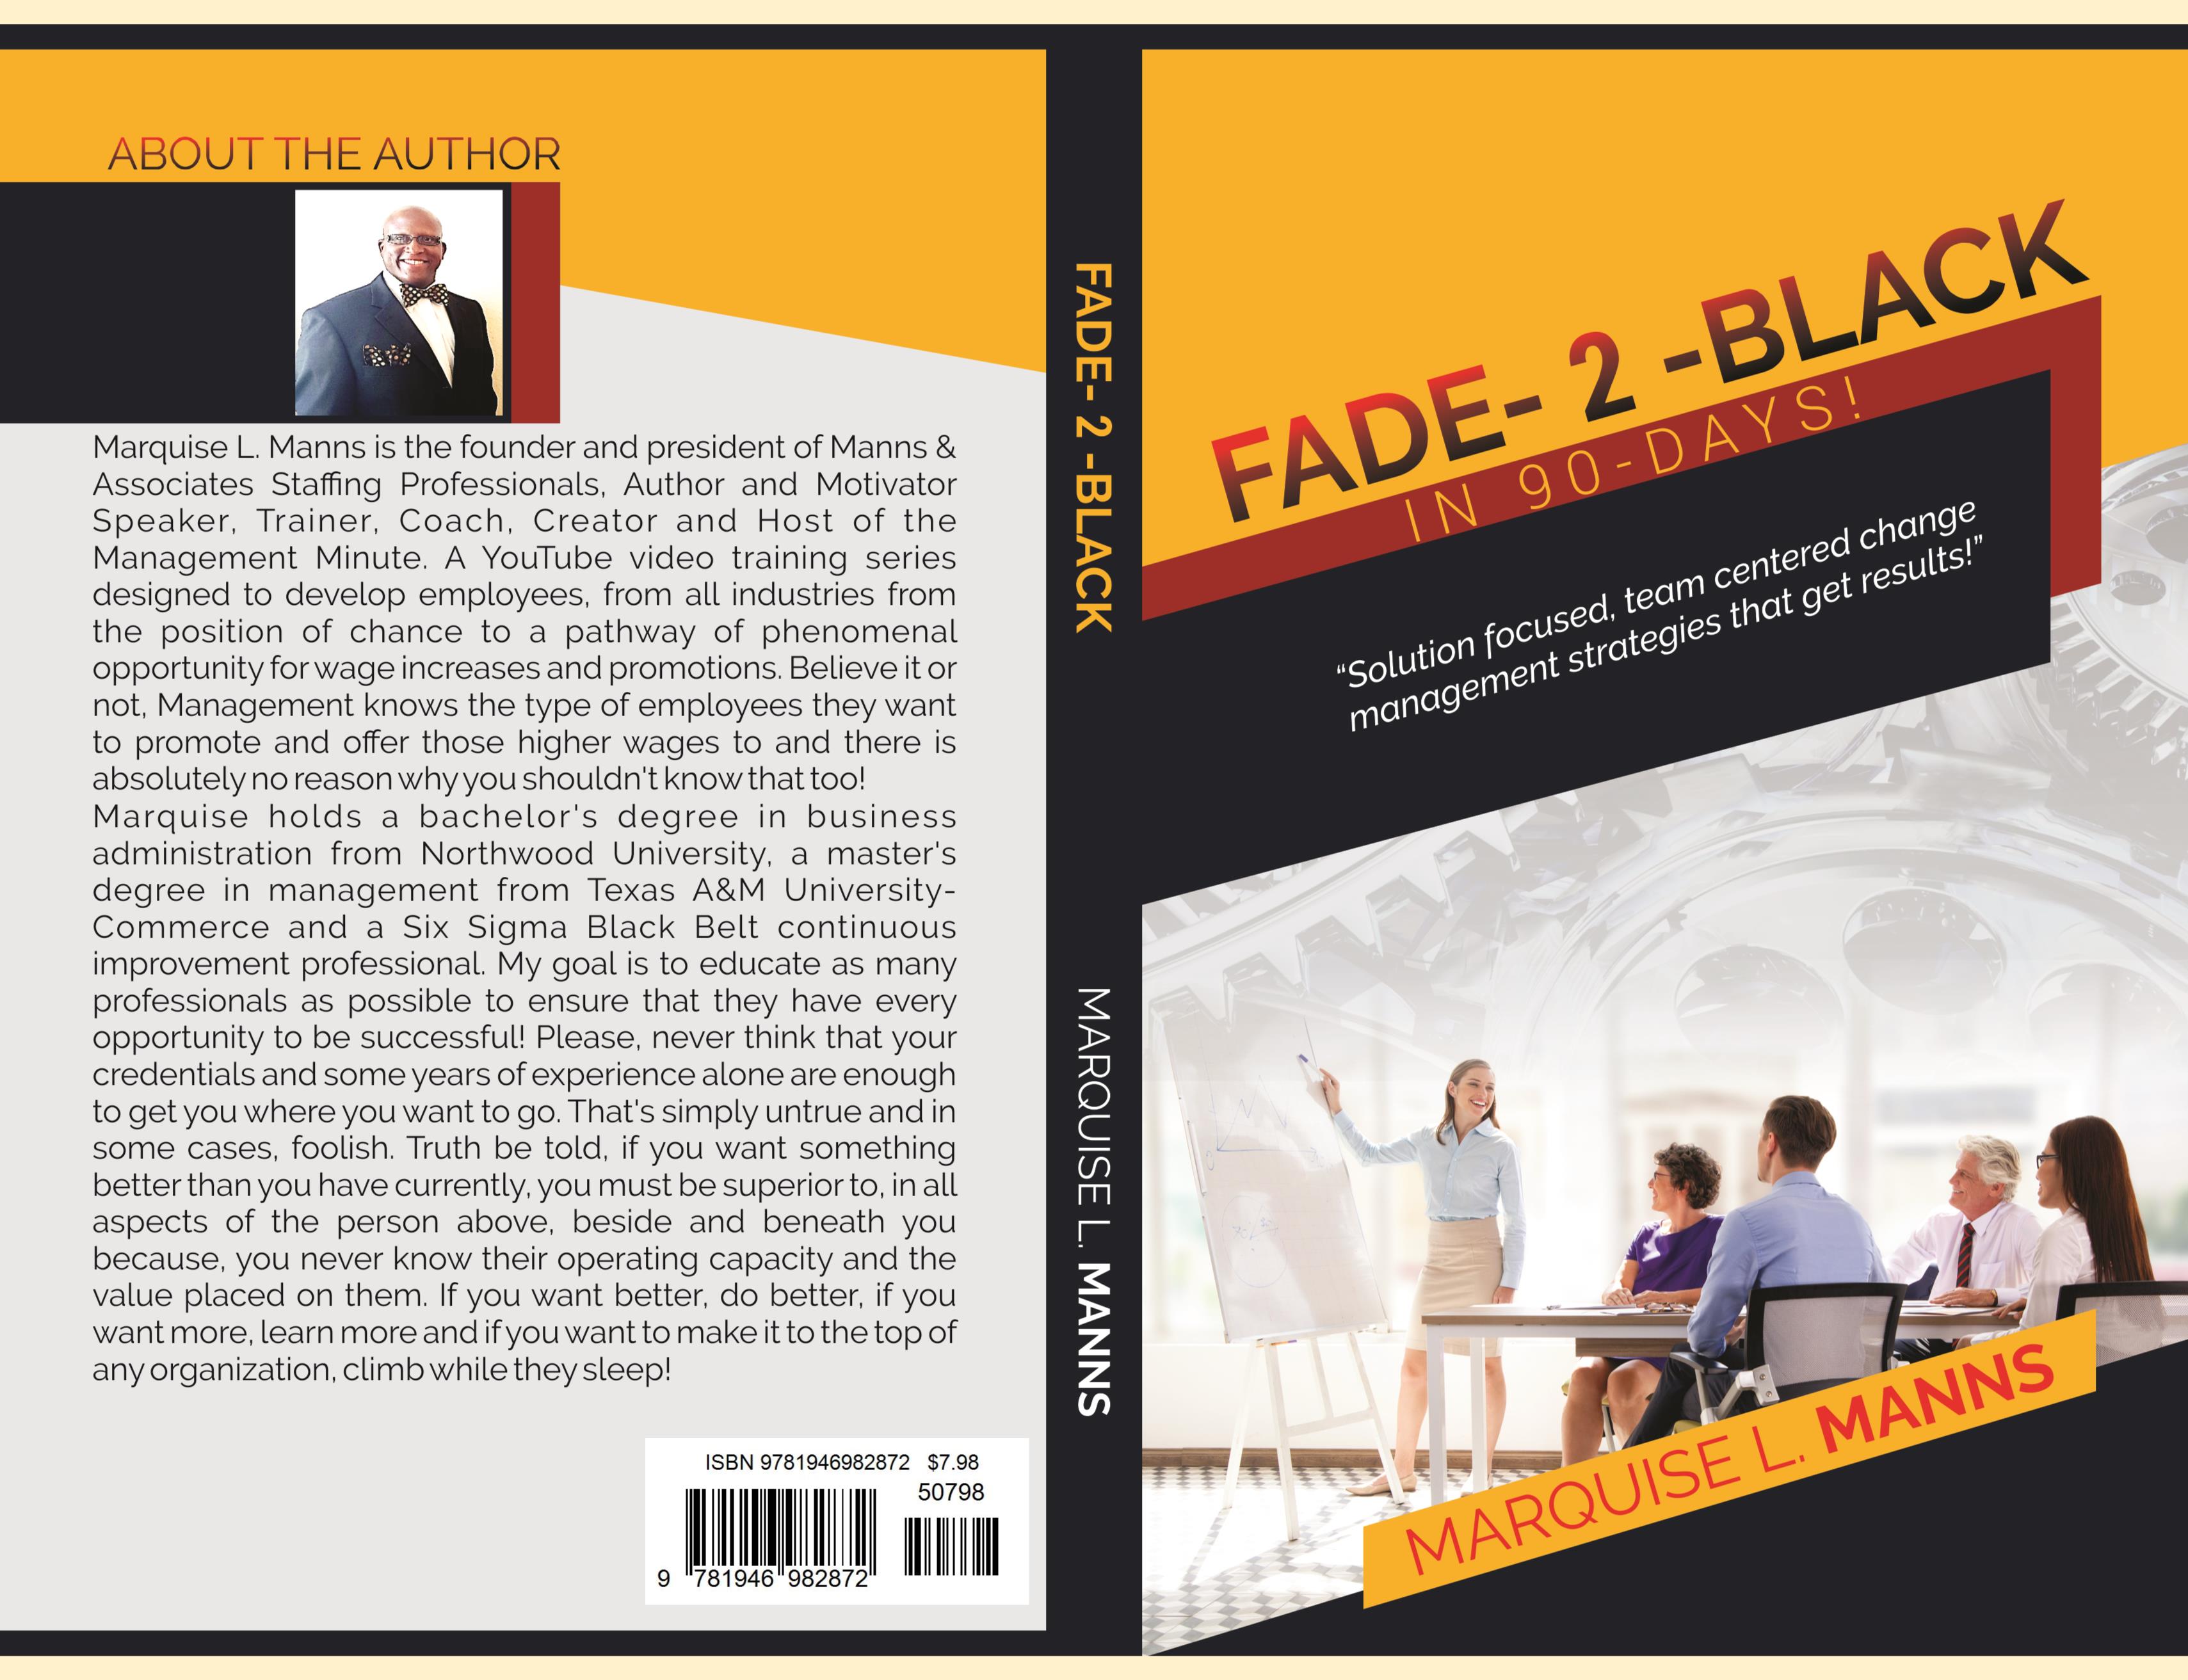 Fade -2- Black In 90-Days cover image